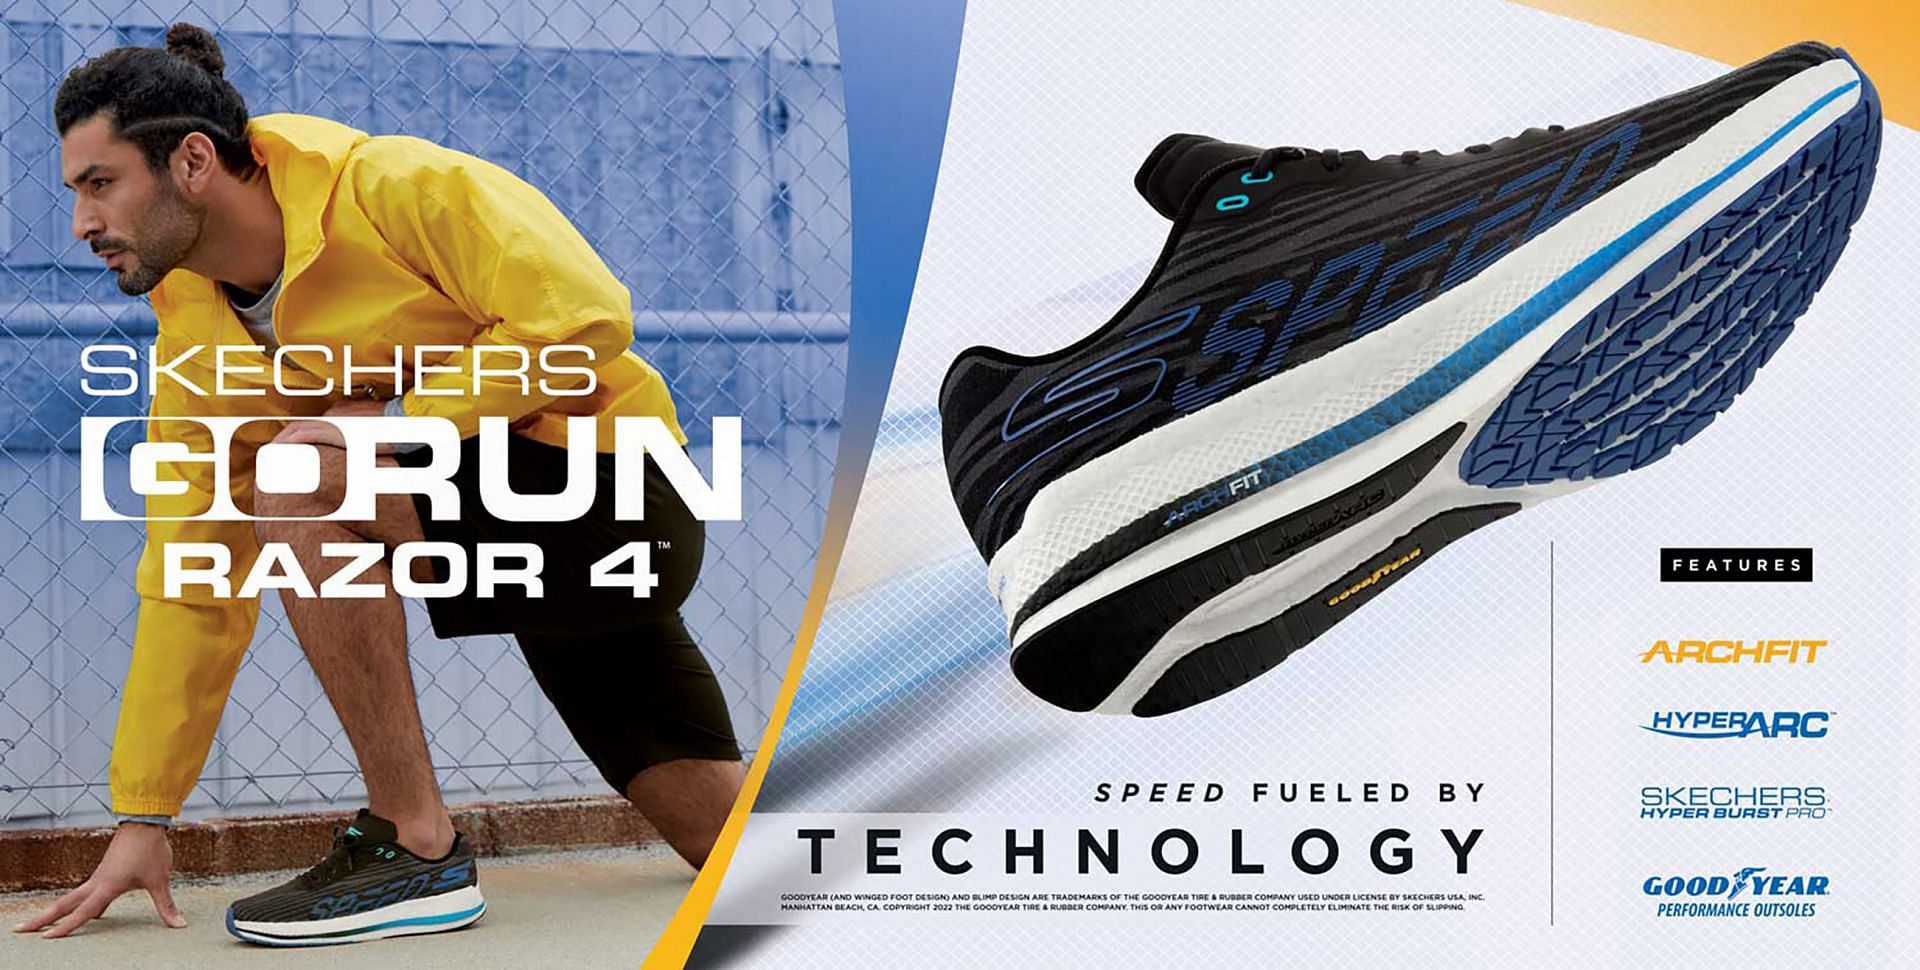 5 features that make Skechers GO RUN Razor 4 ultimate for runners